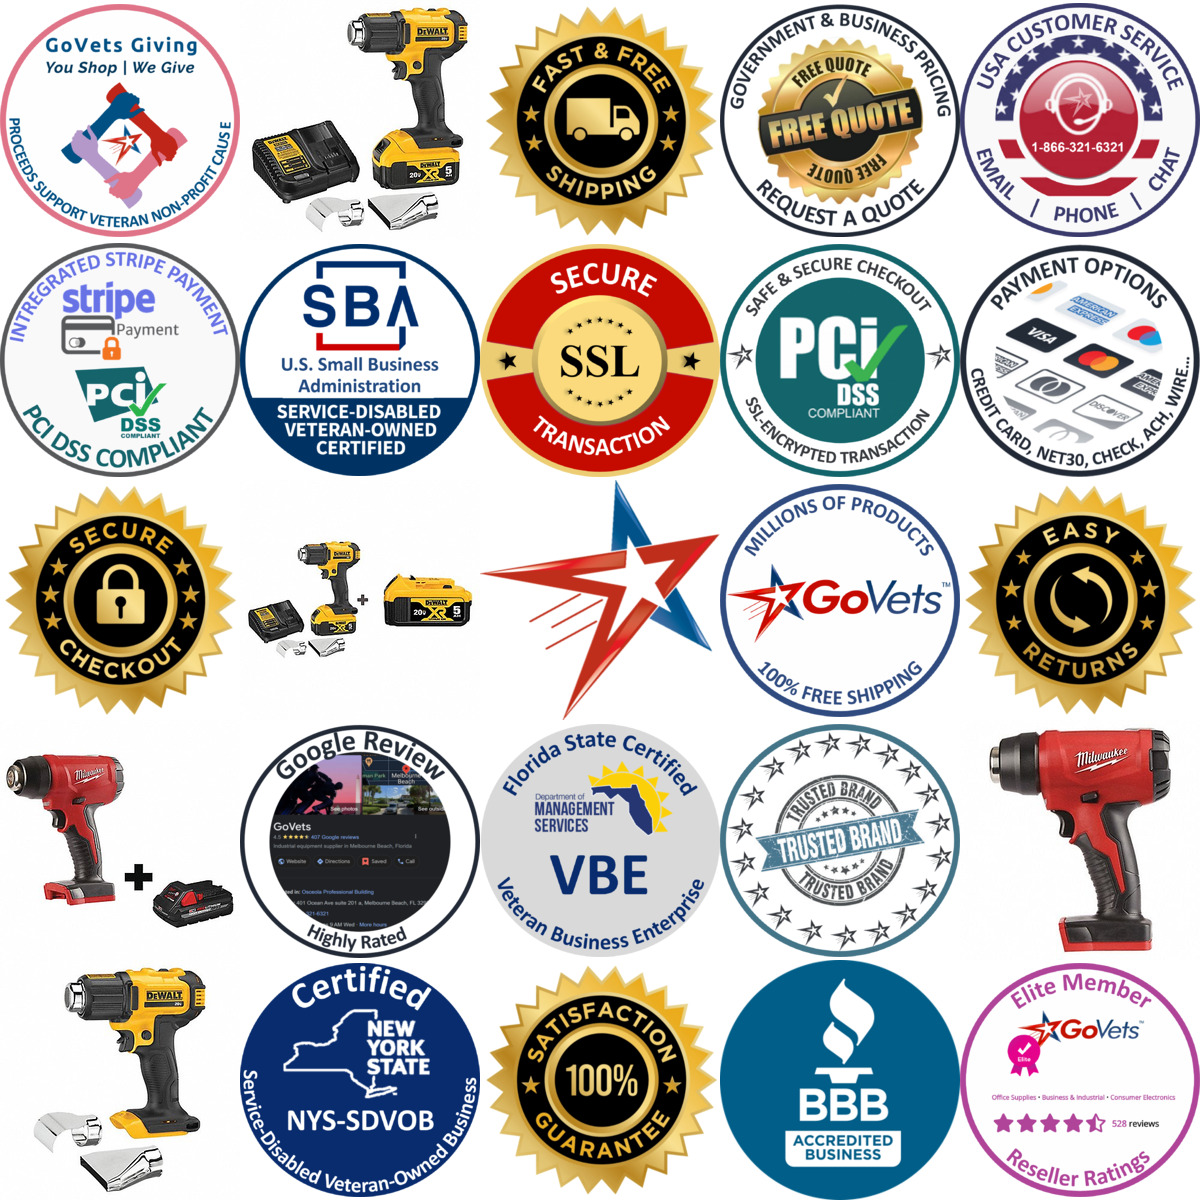 A selection of Cordless Heat Guns and Blowers products on GoVets